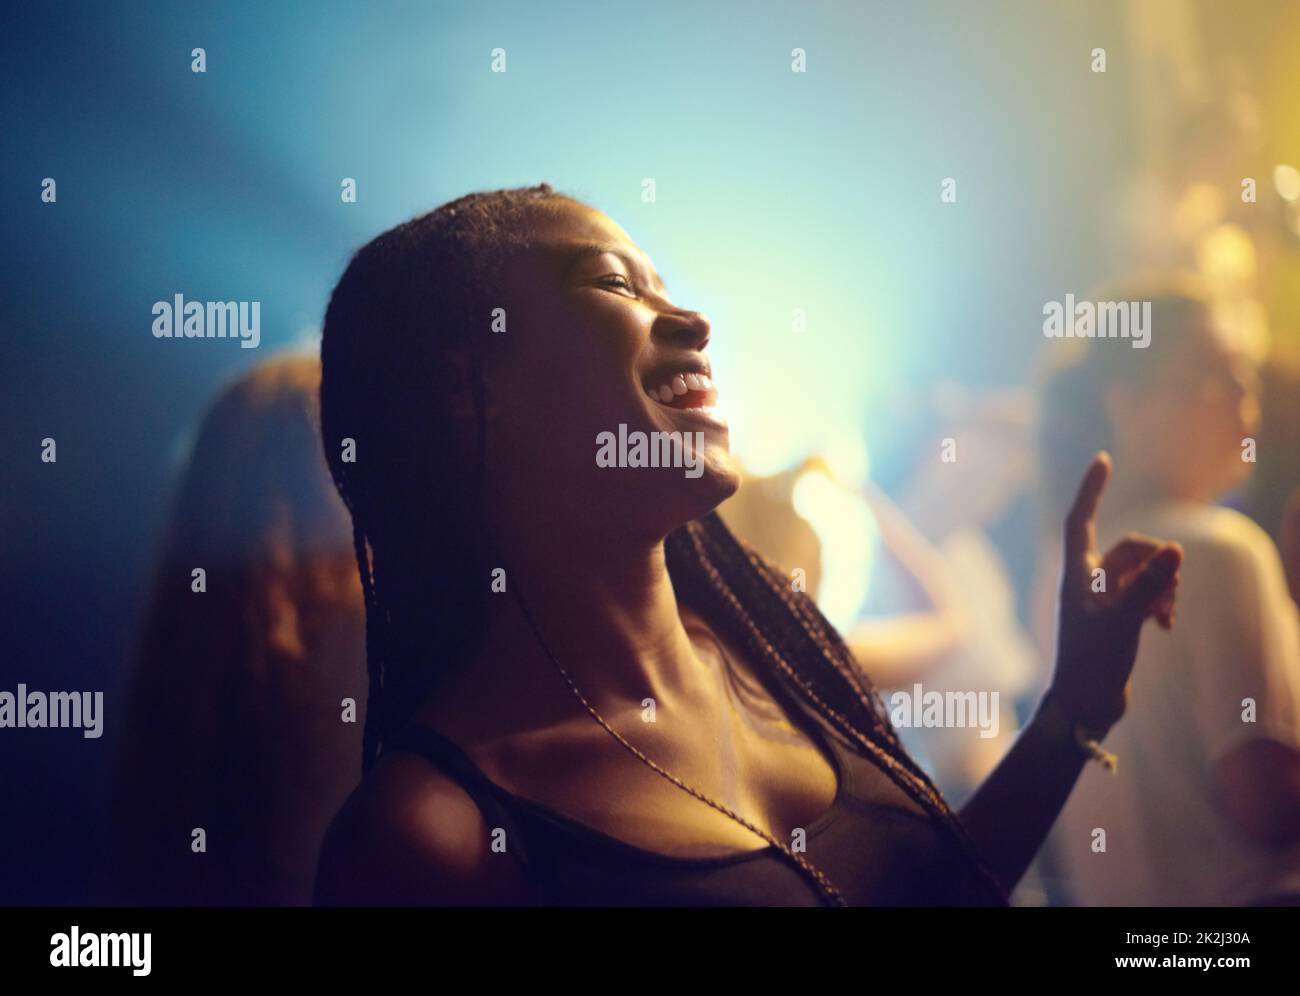 A young girl partying in a club and moving to the music. This concert was created for the sole purpose of this photo shoot, featuring 300 models and 3 live bands. All people in this shoot are model released. Stock Photo